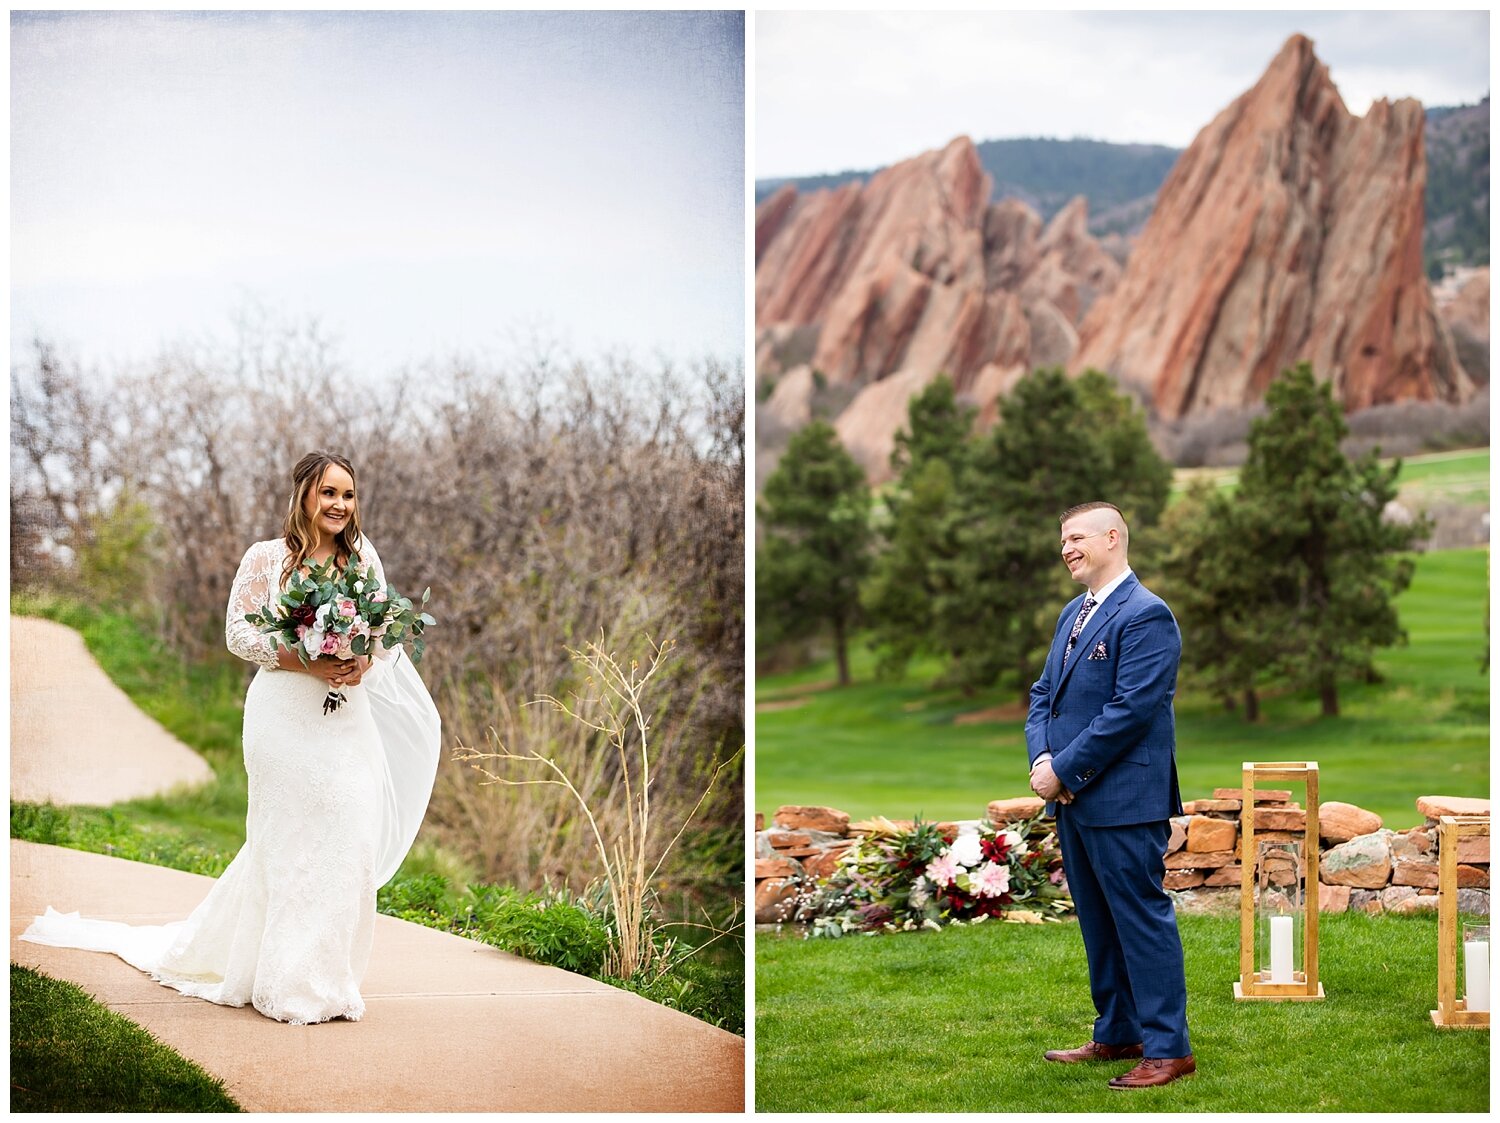 Molly and Nick's Wedding Day|Arrowhead Golf Course Elopement_0037.jpg